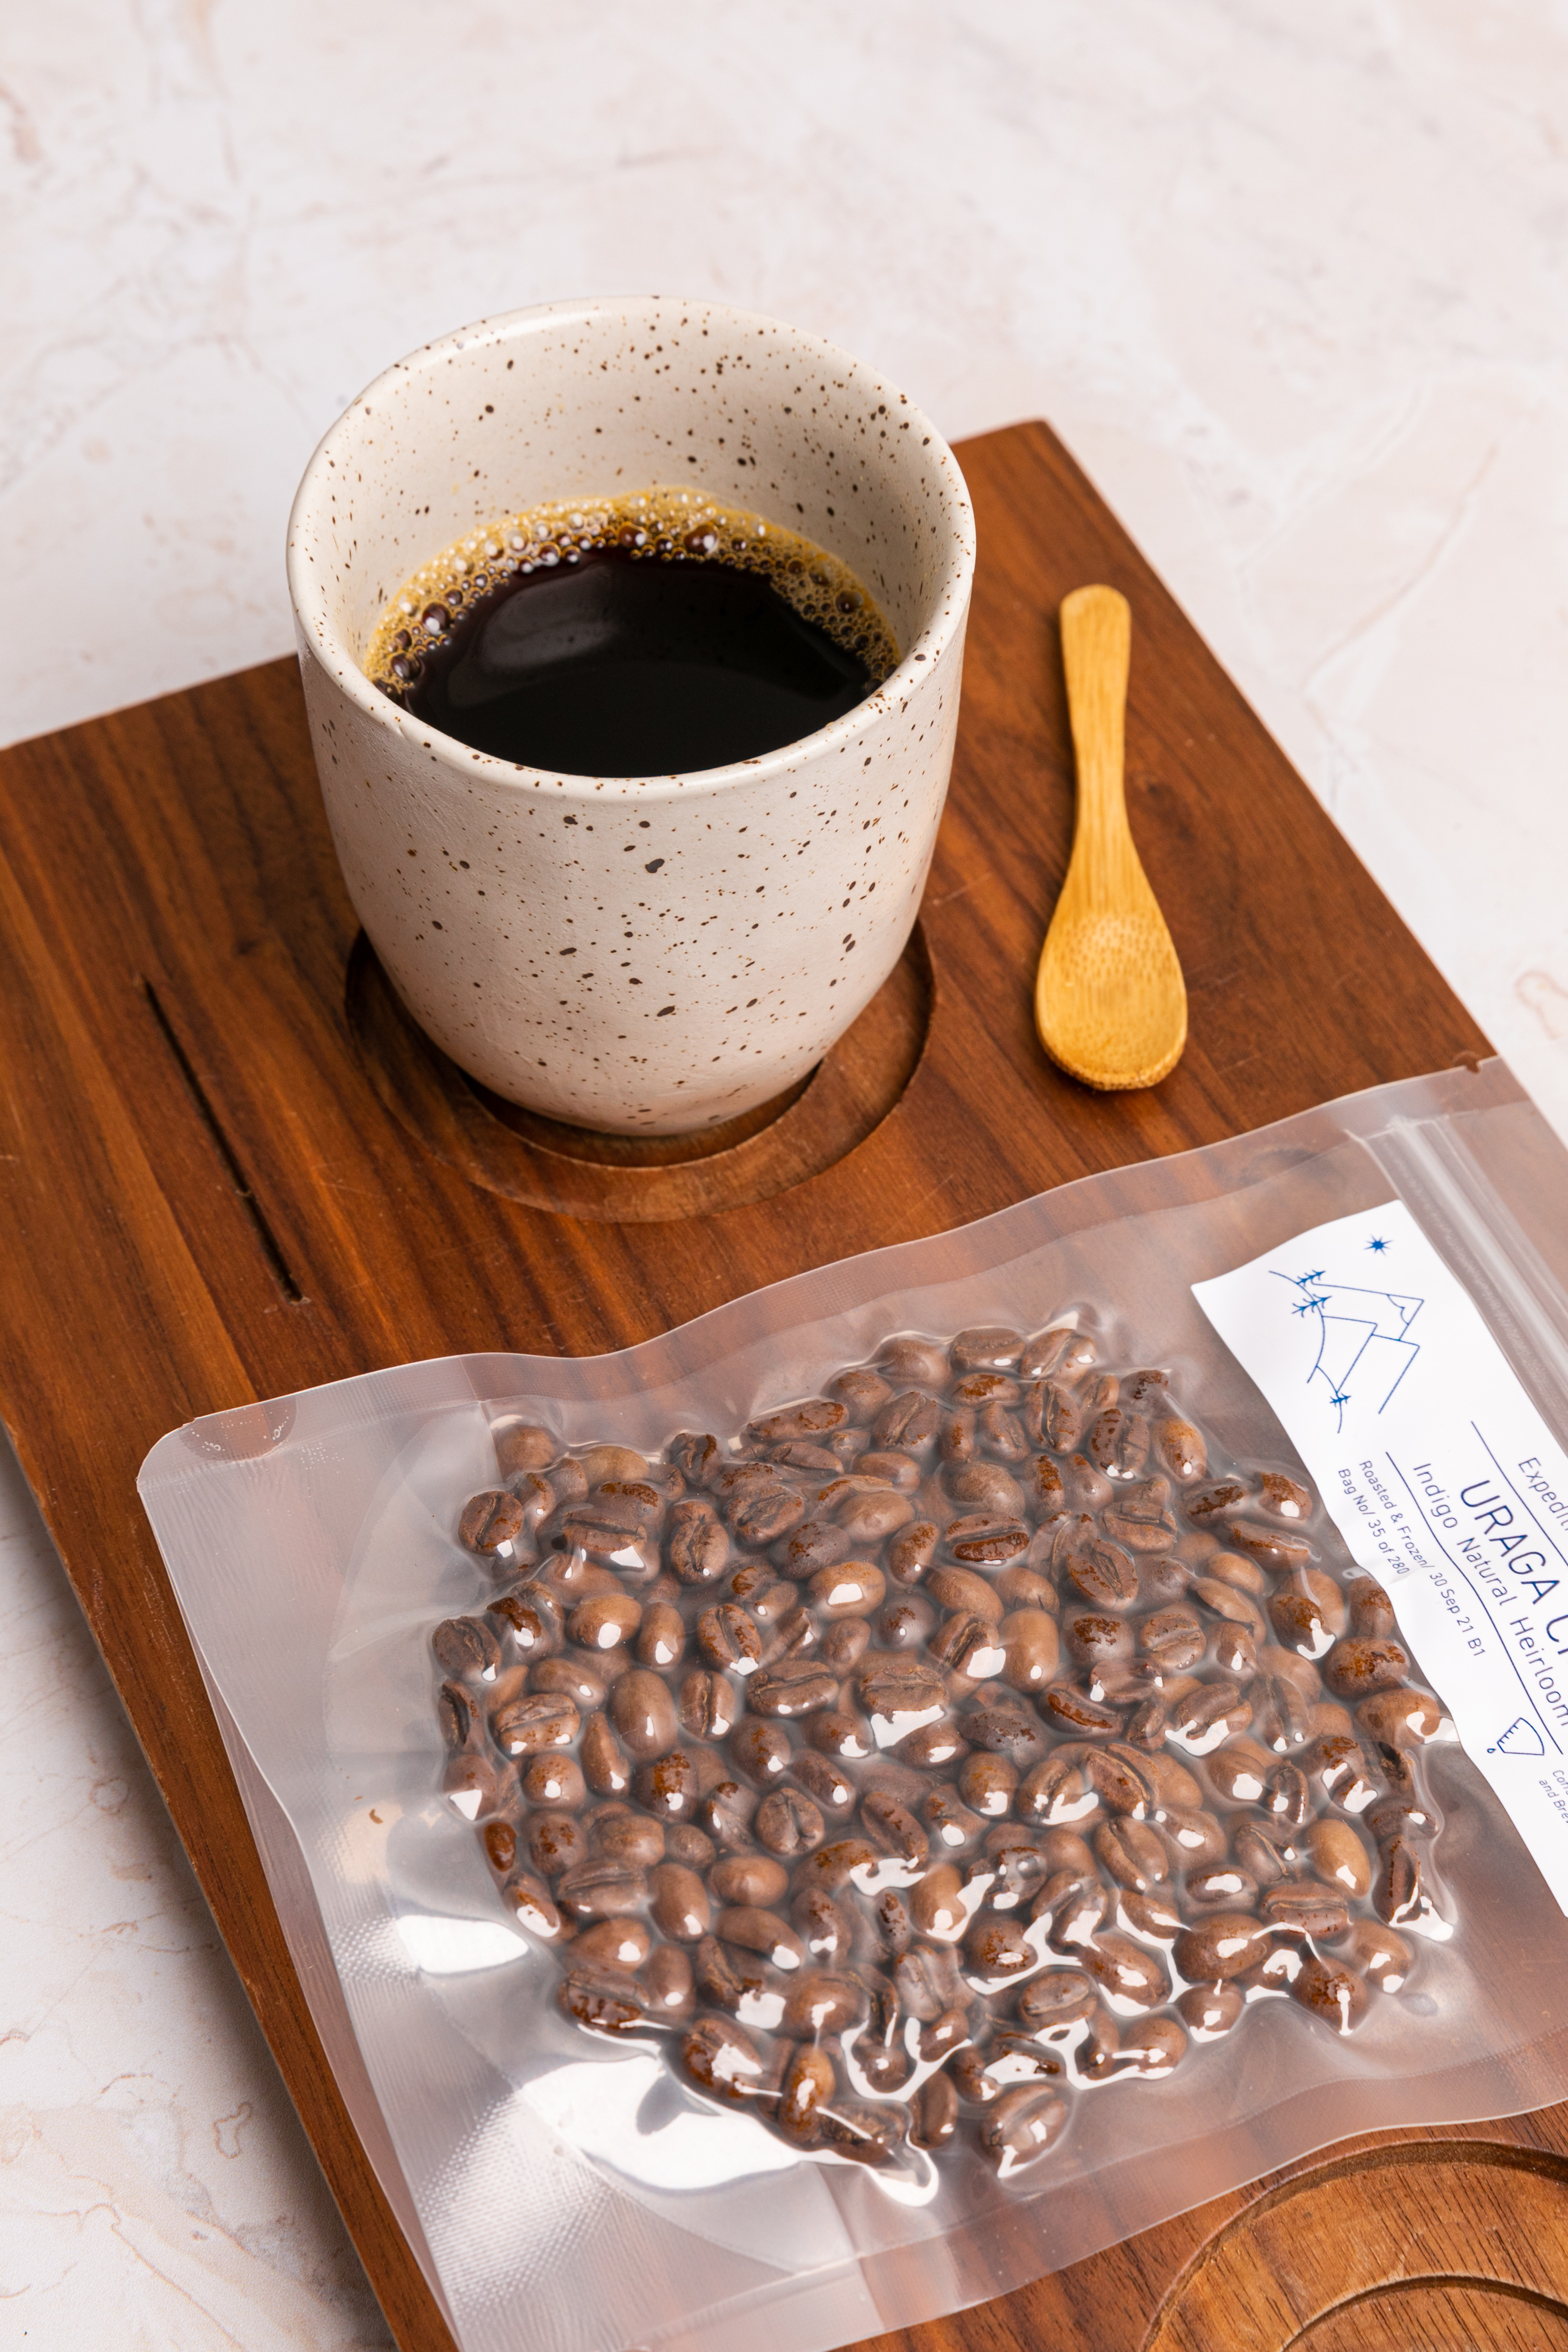 Expedition coffee brewed into a ceramic mug and presented on a wooden tray